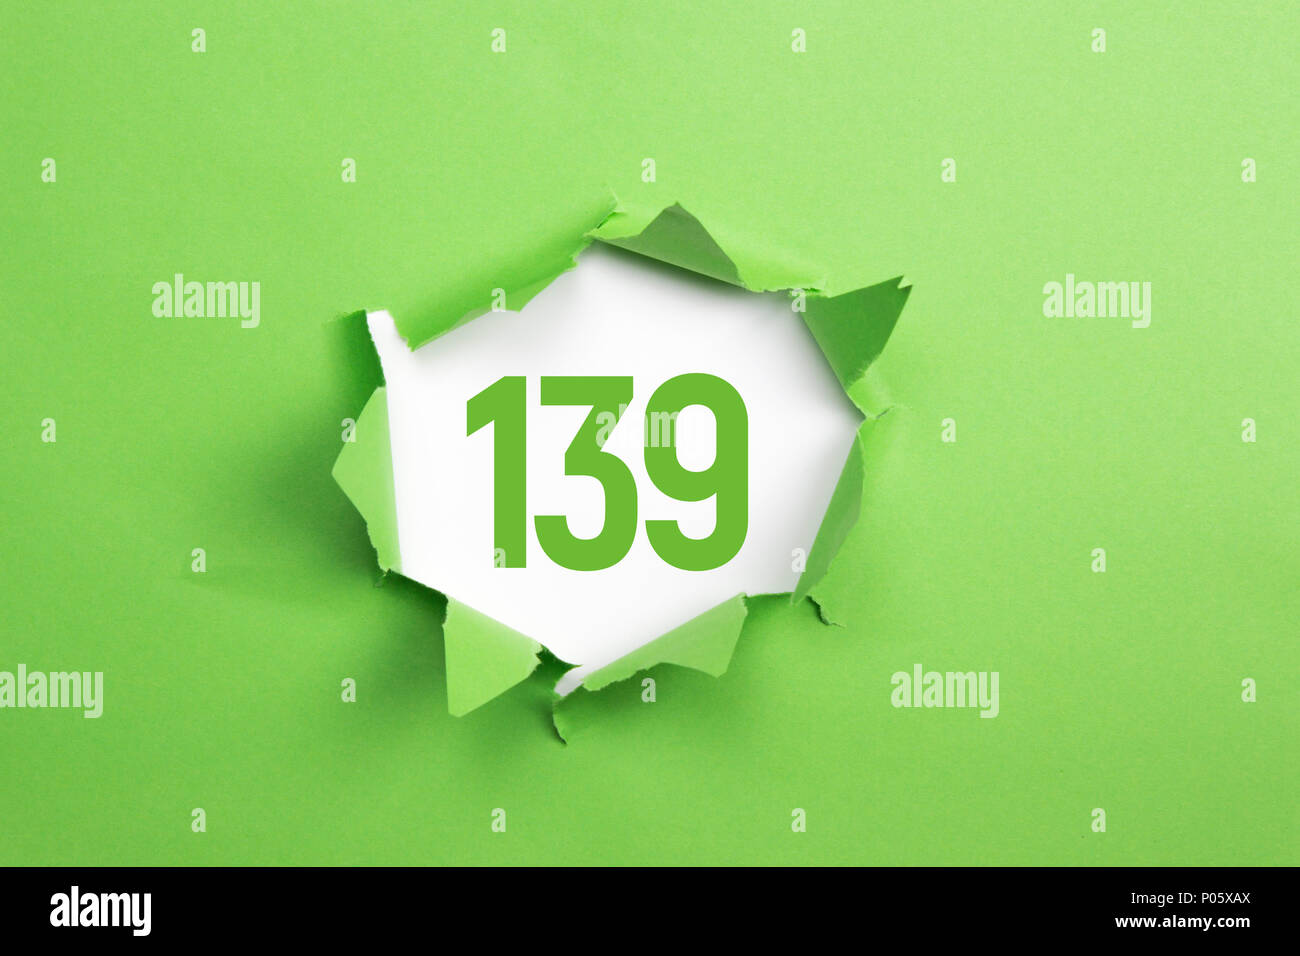 Green Number 195 on green paper background Stock Photo